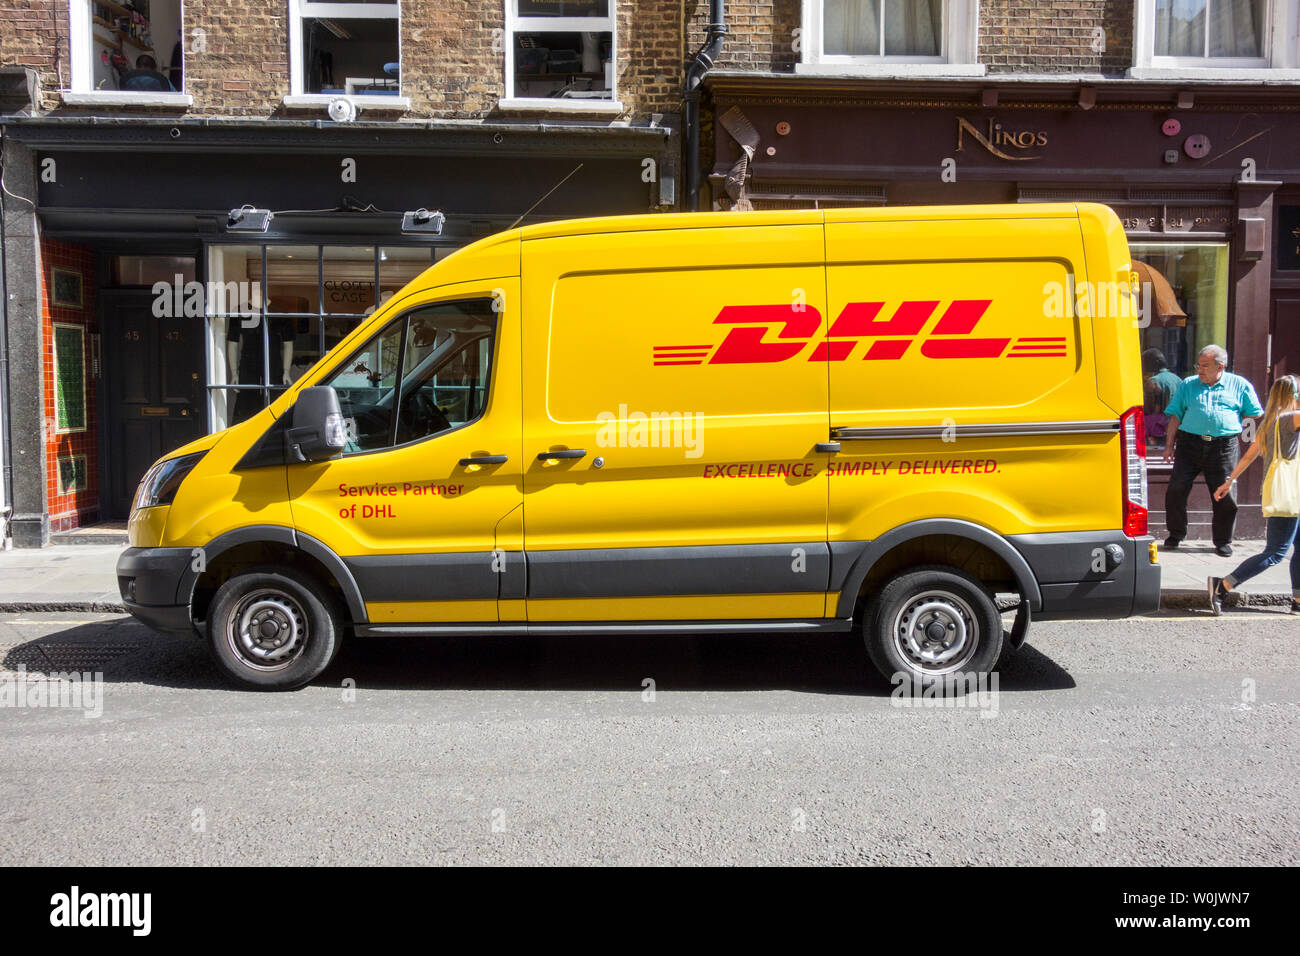 A DHL delivery van parked on a street in Soho, central London, UK Stock Photo